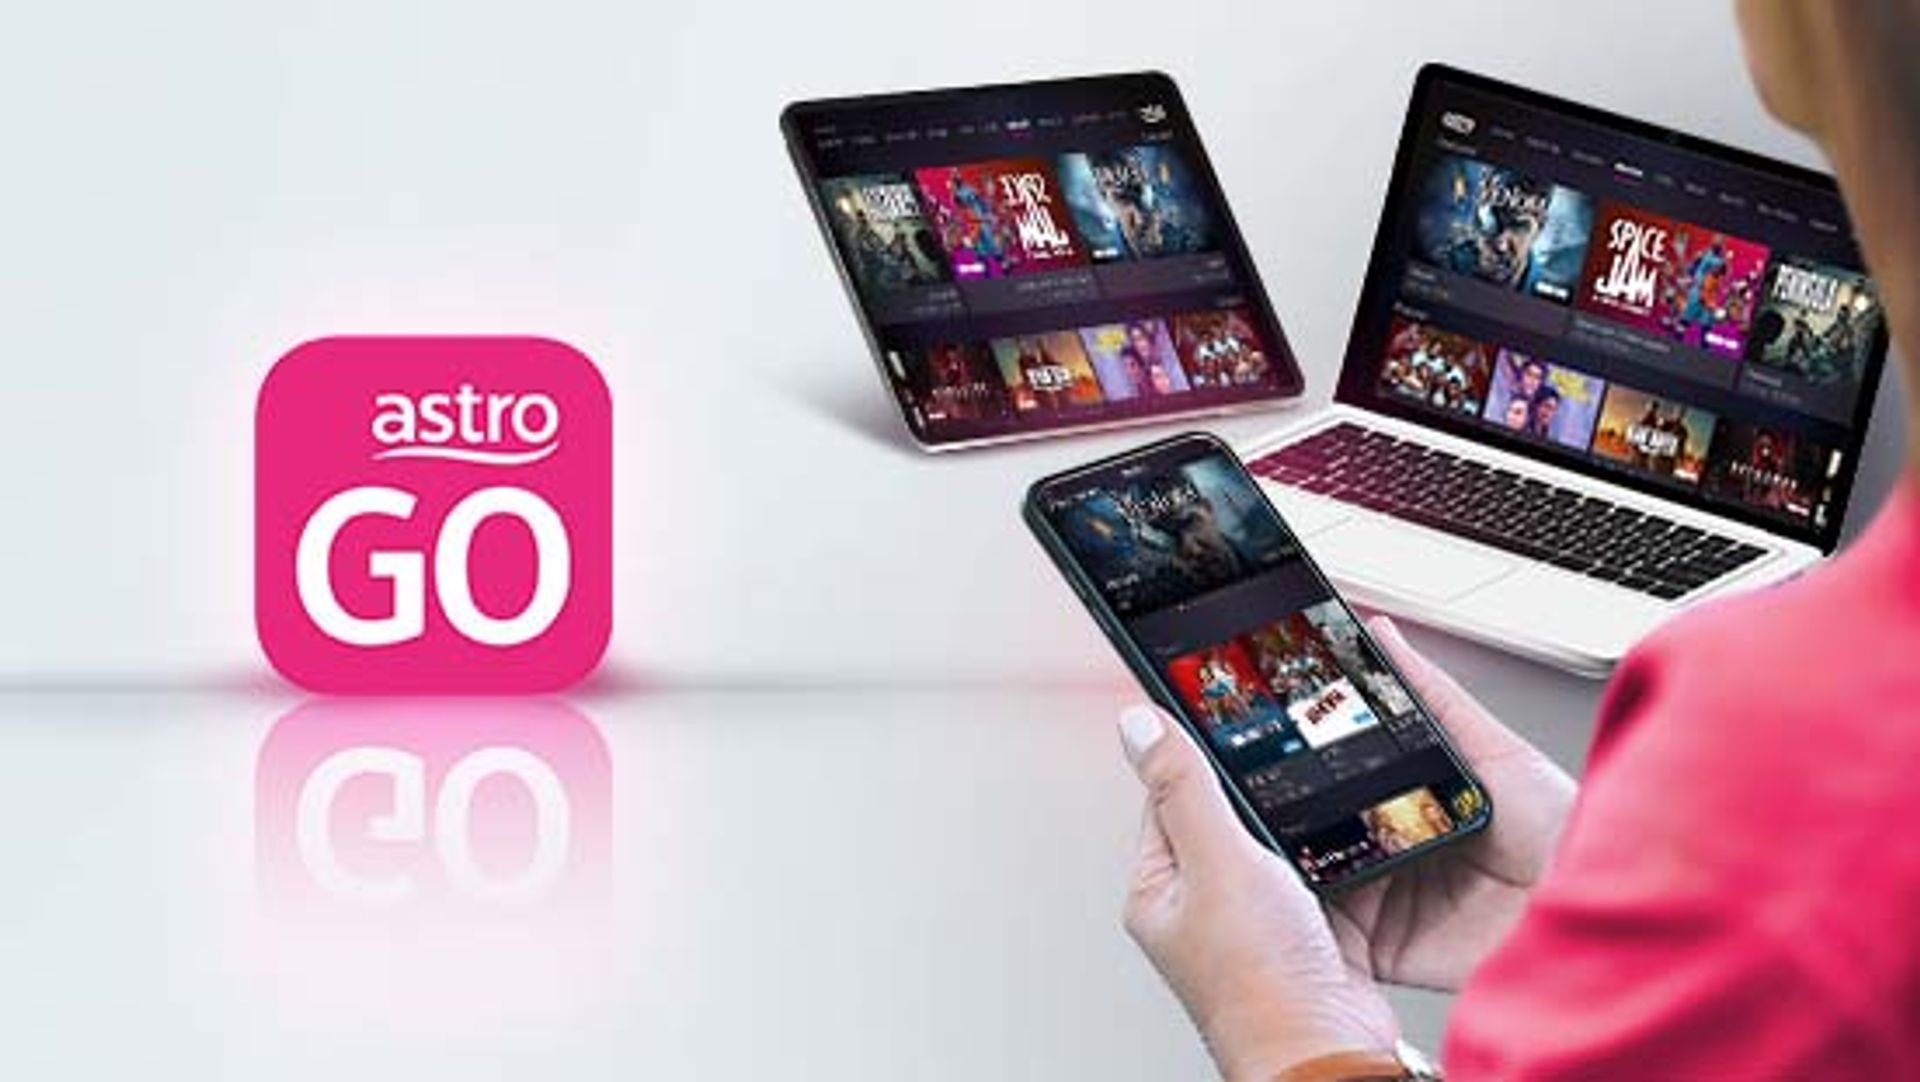 Take Astro with you wherever you go with Astro GO